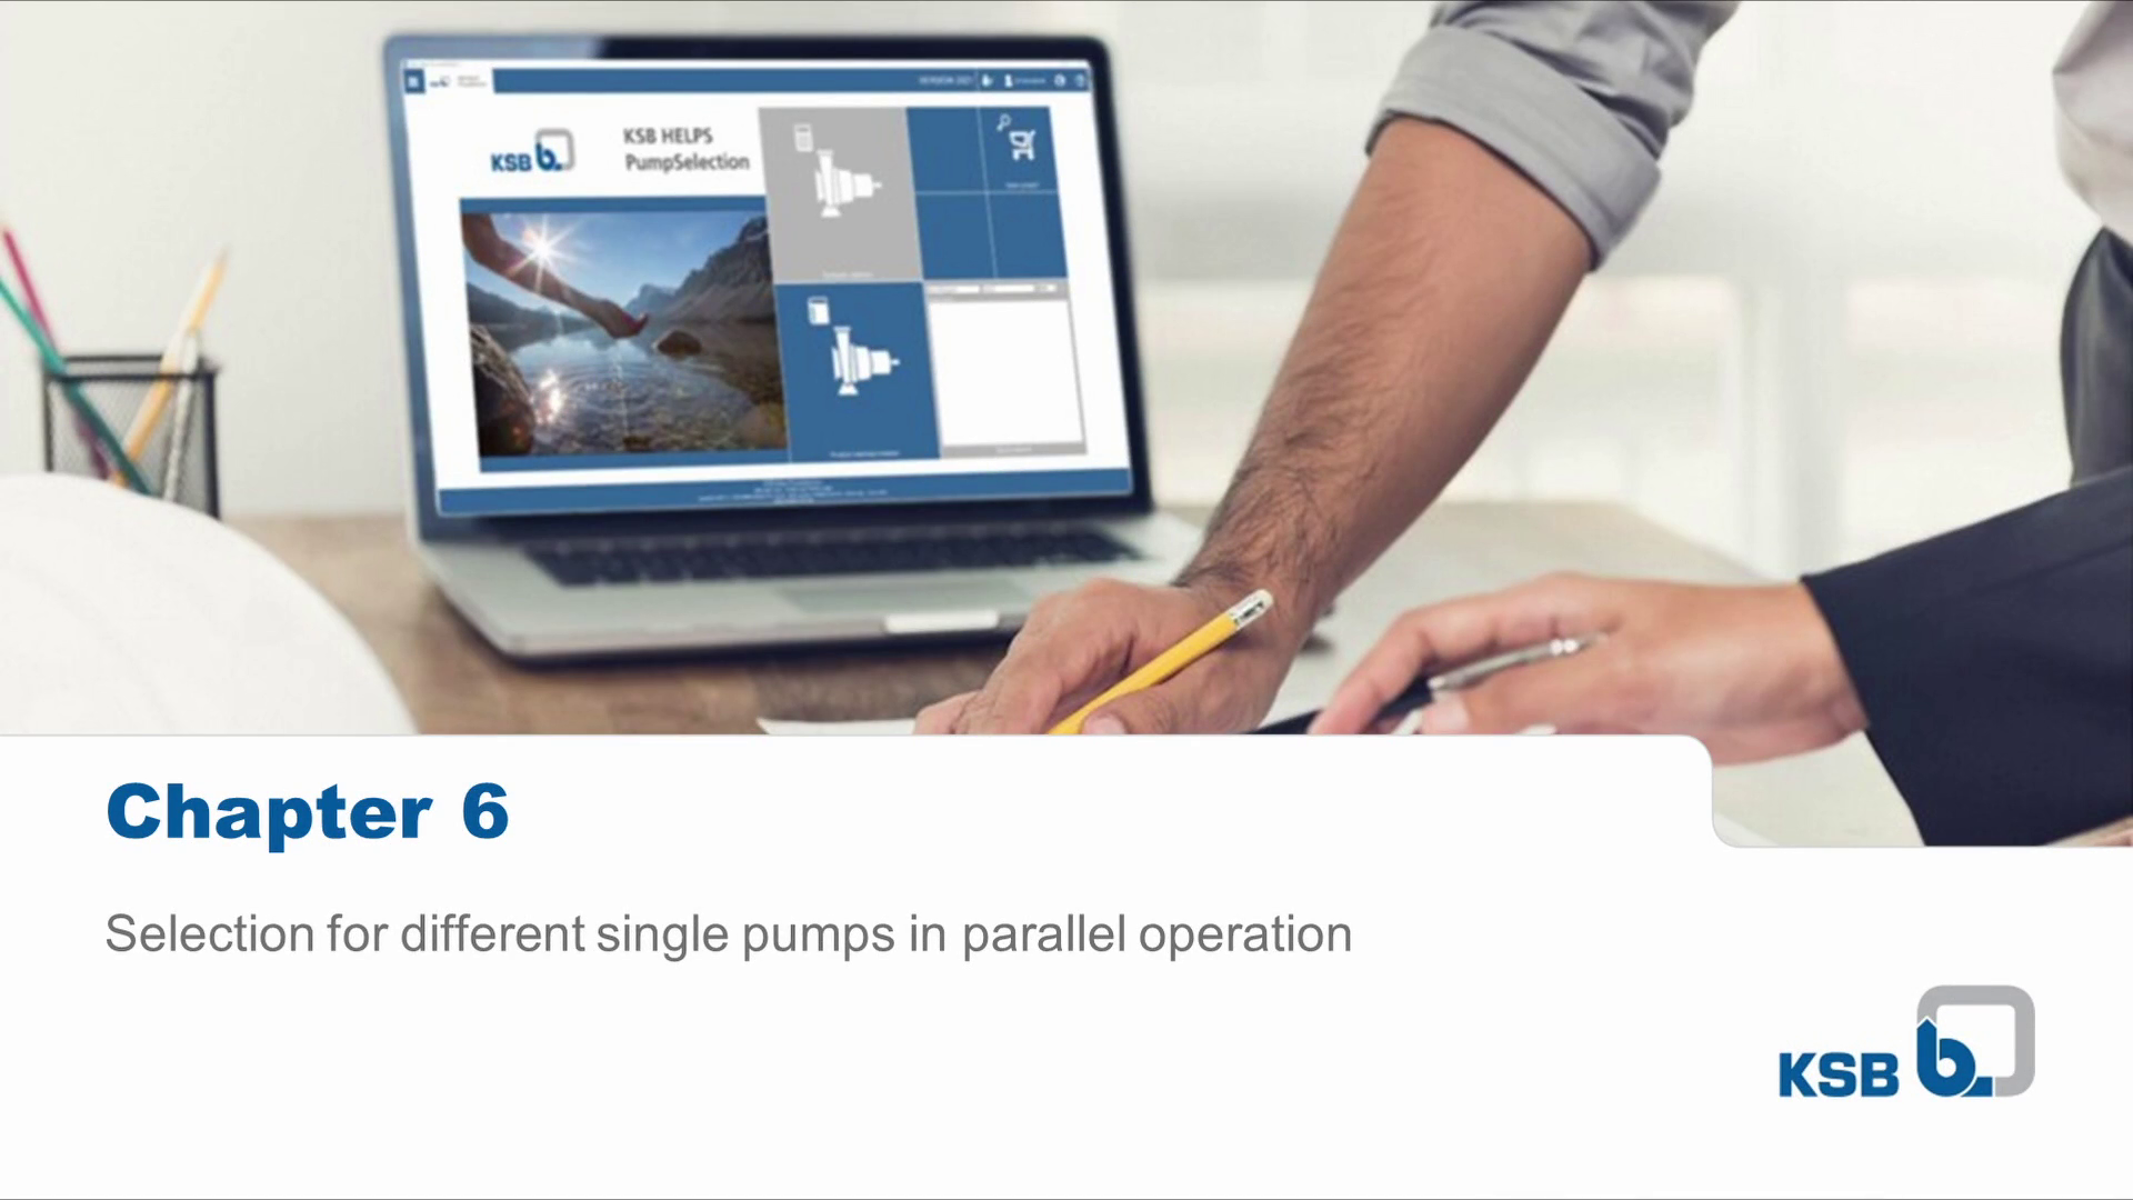 Tutorial KSB HELPS PumpSelection, Chapter 6: Selection for different single pumps in parallel operation